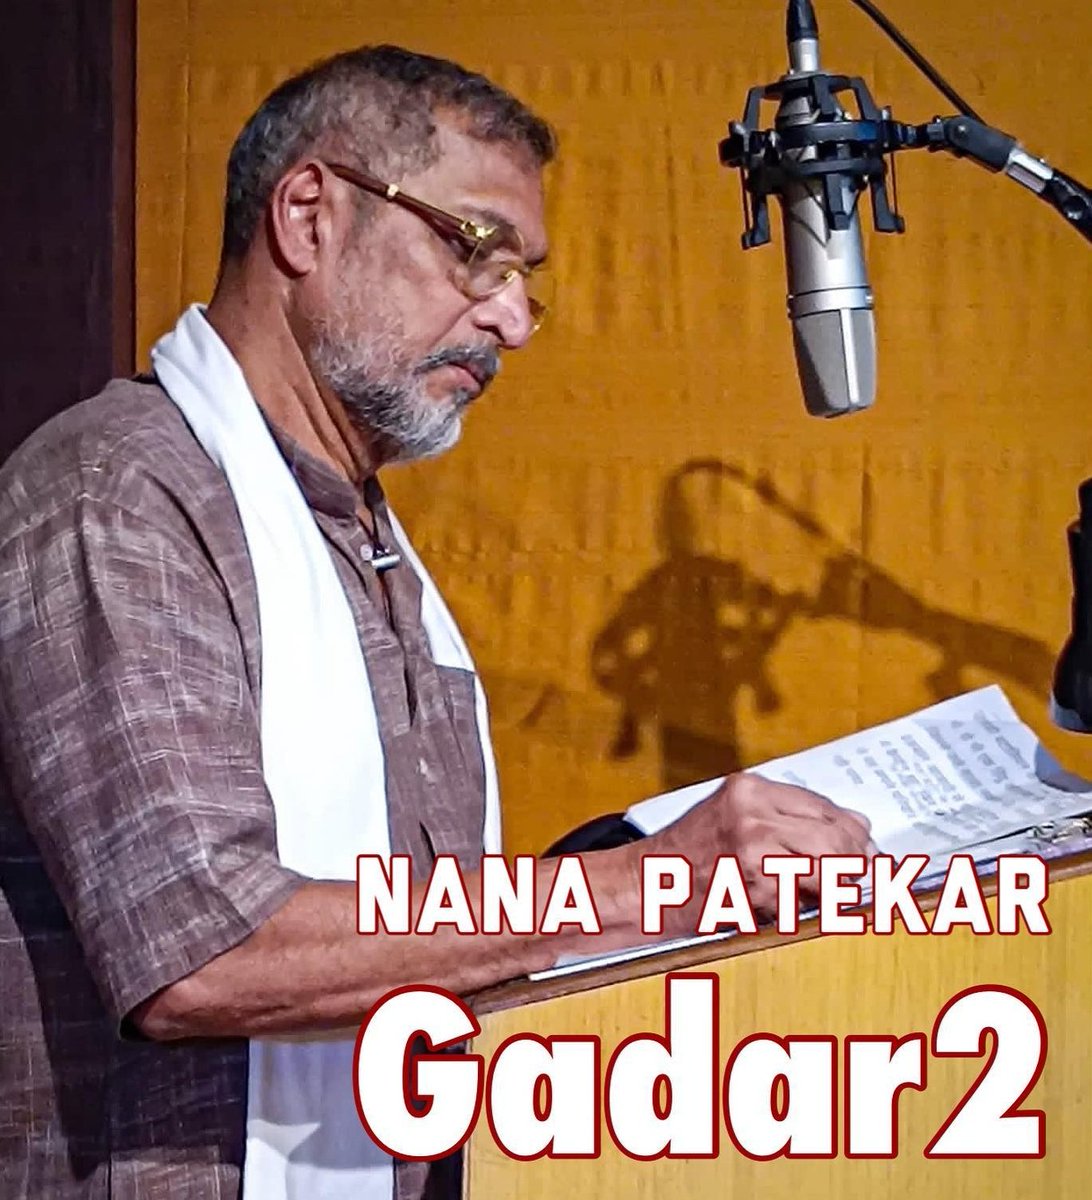 Gadar2- NANA PATEKAR DOES VOICEOVER FOR ‘GADAR 2’.. #NanaPatekar has lent his voice for #Gadar2..#Nana’s voiceover will introduce #Gadar2 to the moviegoers at the very start of the film.
It may be recalled that #OmPuri had done the voiceover for the introductory scenes of #Gadar